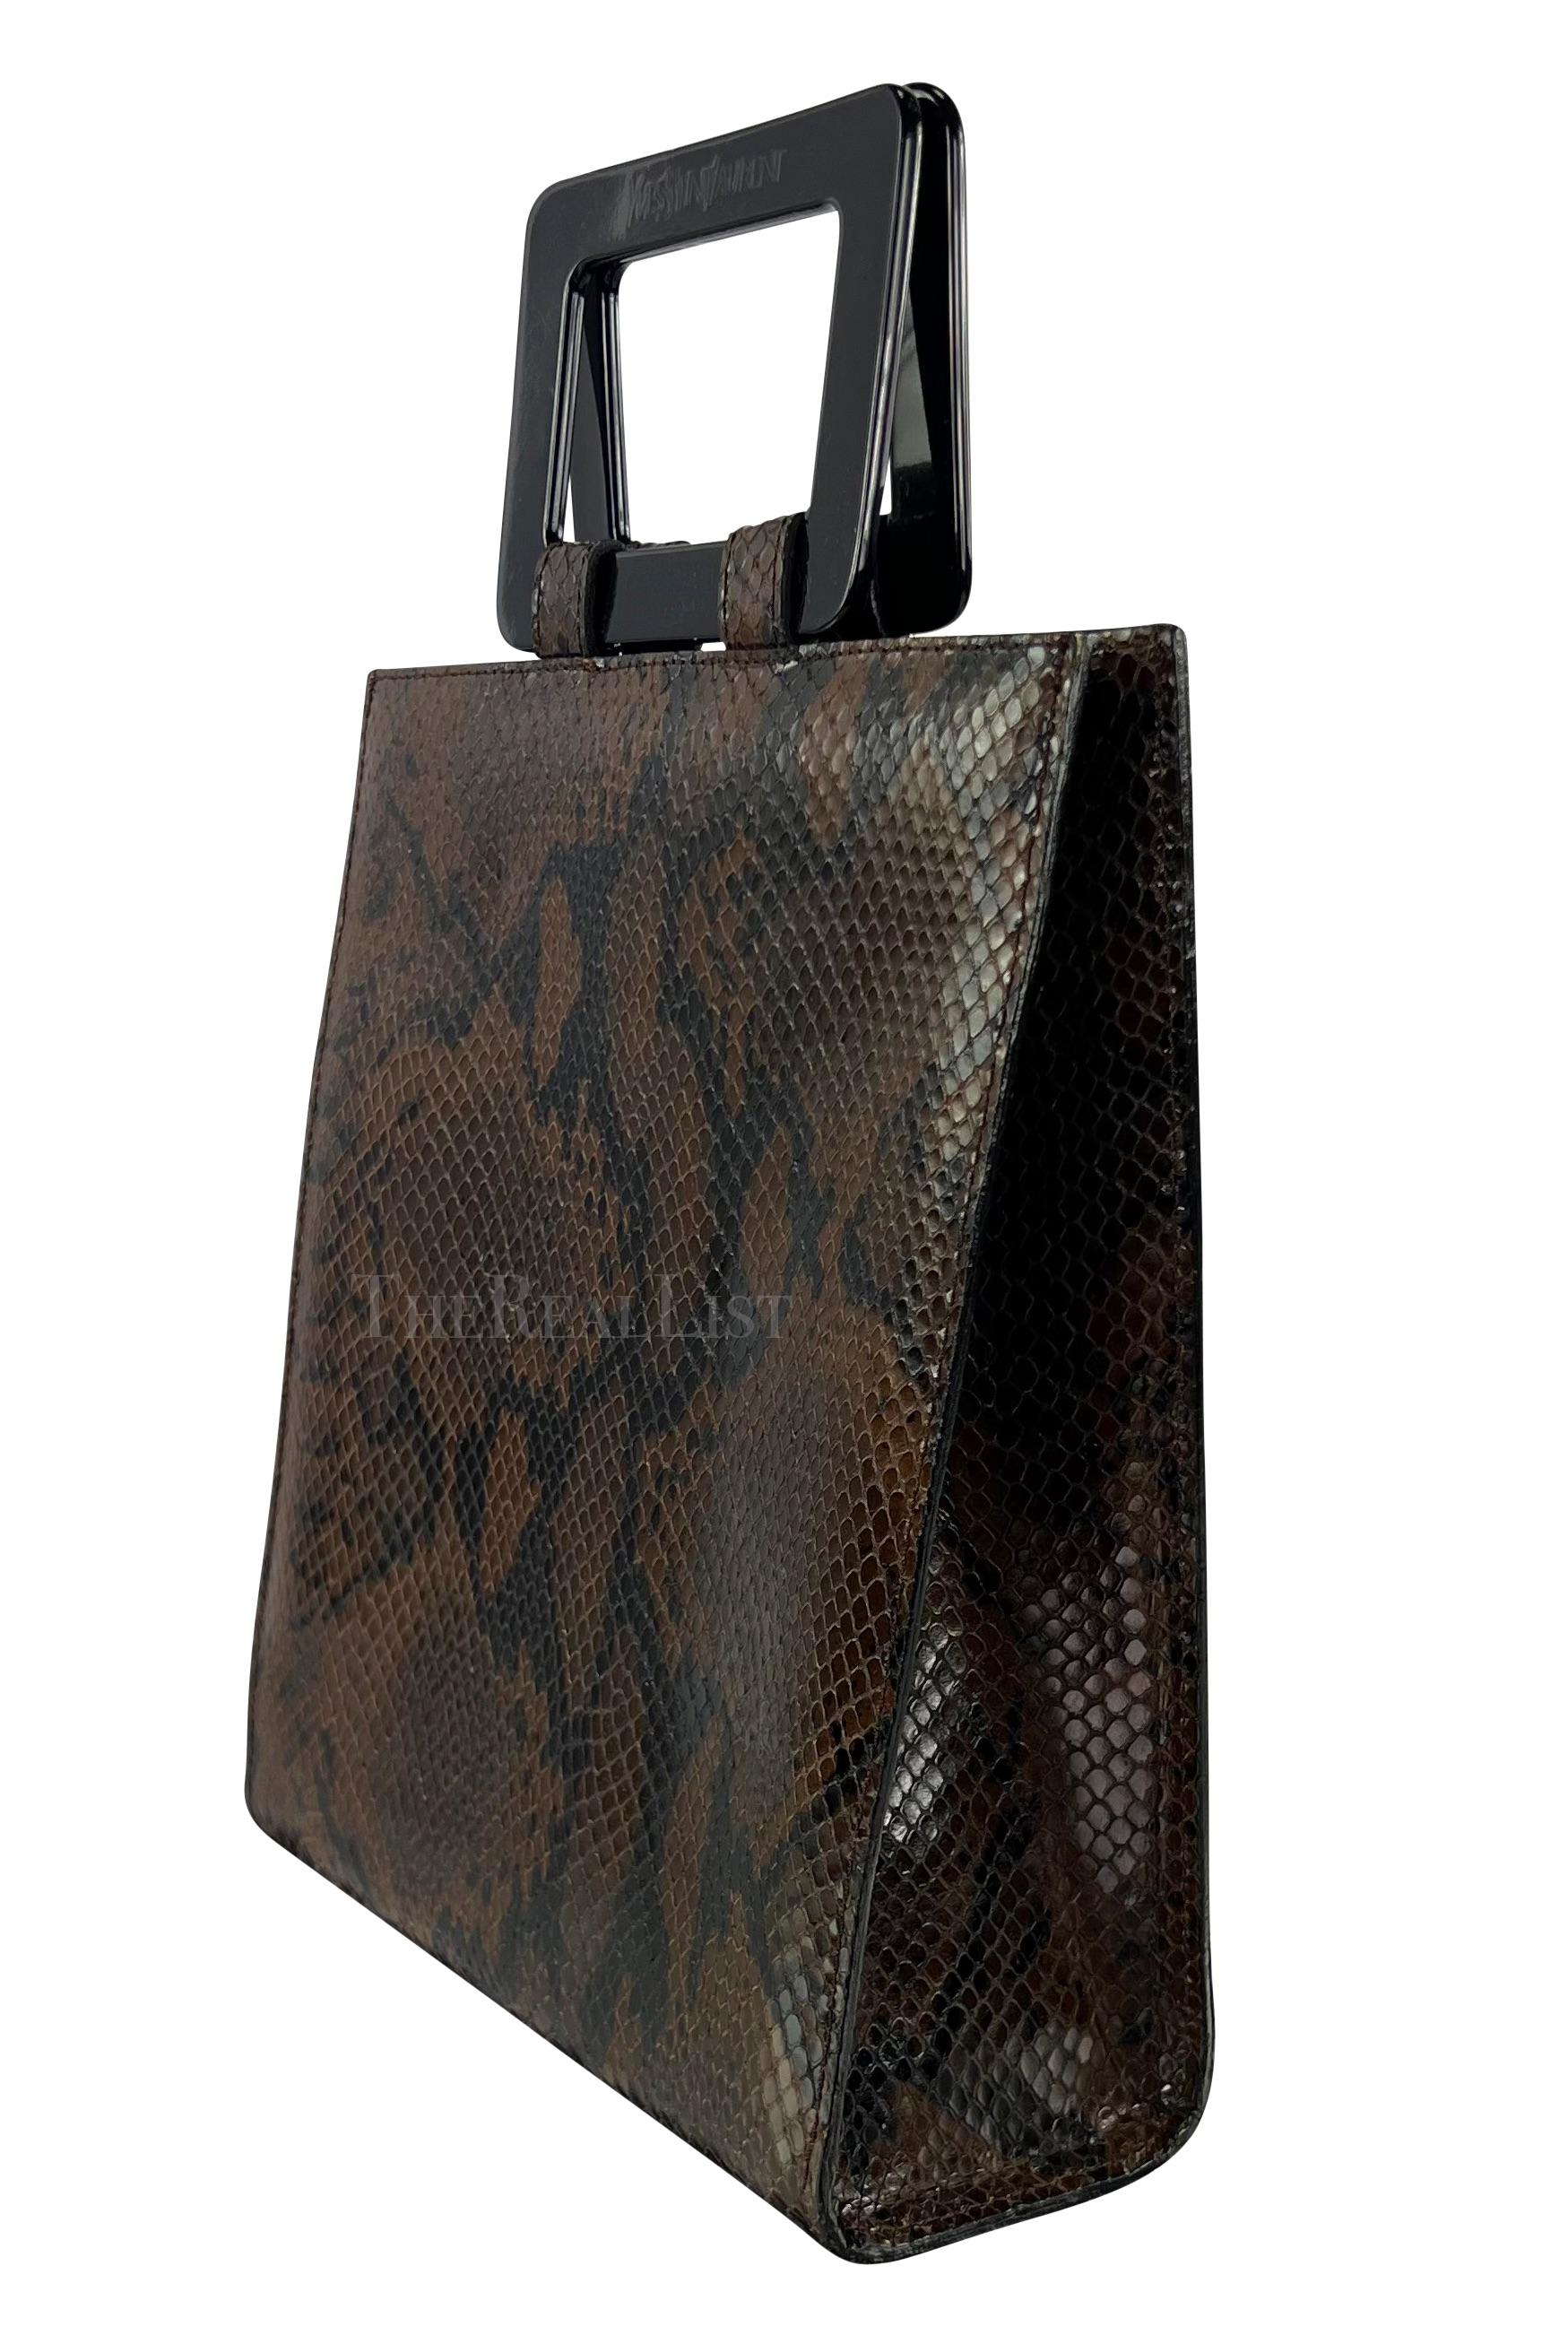 Presenting a fabulous brown python Yves Saint Laurent Rive Gauche top handle bag. From the 1990s, this bag's structured design features the exotic beauty of dark brown python, making it a true standout piece. The hard angular black acrylic handles